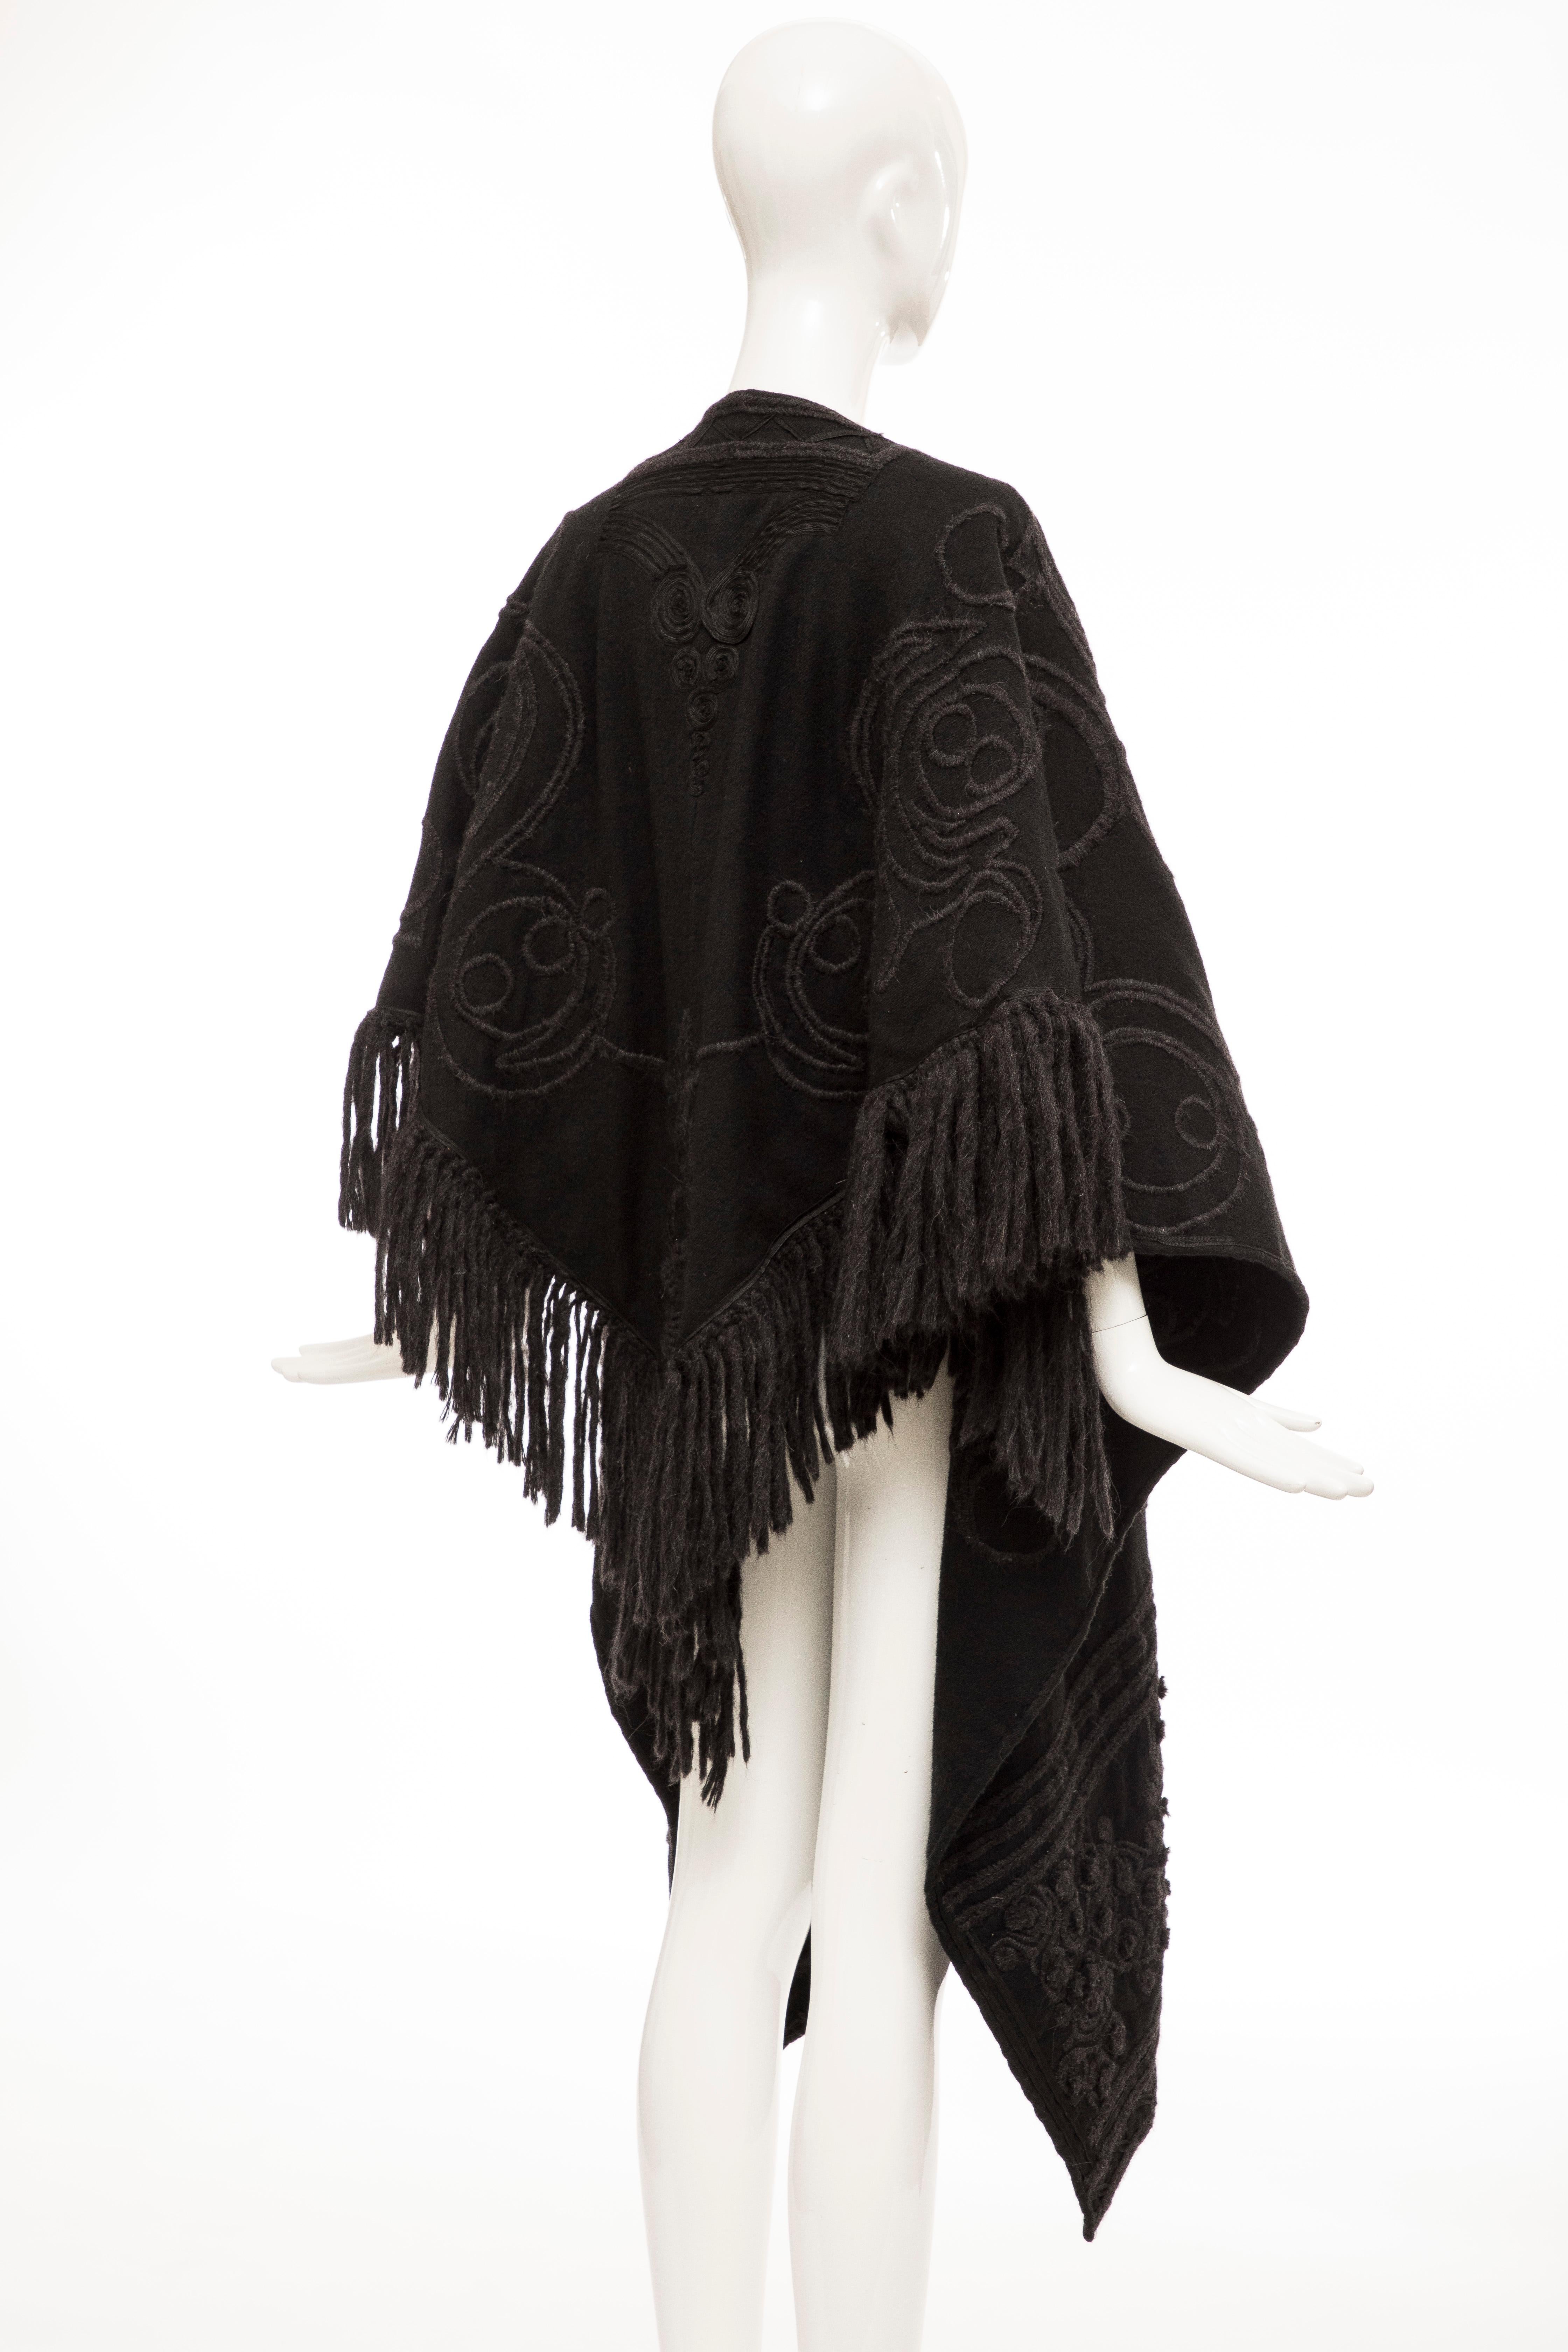 Dries Van Noten Runway Black Wool Embroidered Fringe Cape, Fall 2002 In Good Condition For Sale In Cincinnati, OH